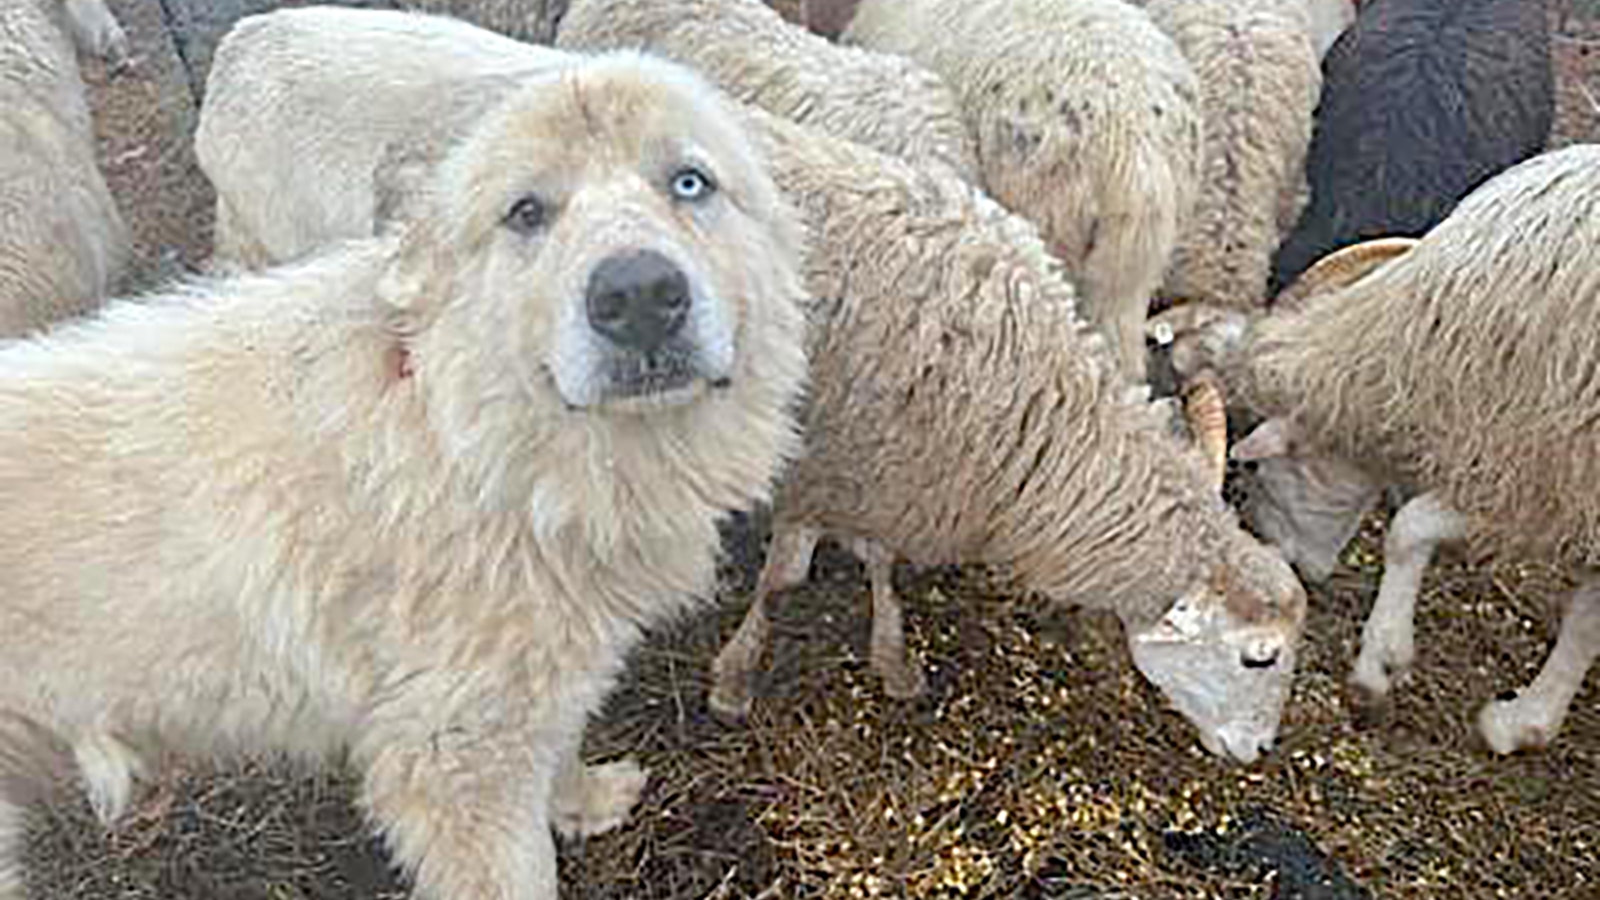 Casper, a Great Pyrenees livestock guard dog, is back with sheep after recovering from life-threatening injuries when he fought off 11 coyotes threatening his flock. He killed eight of them and chased after the other three.